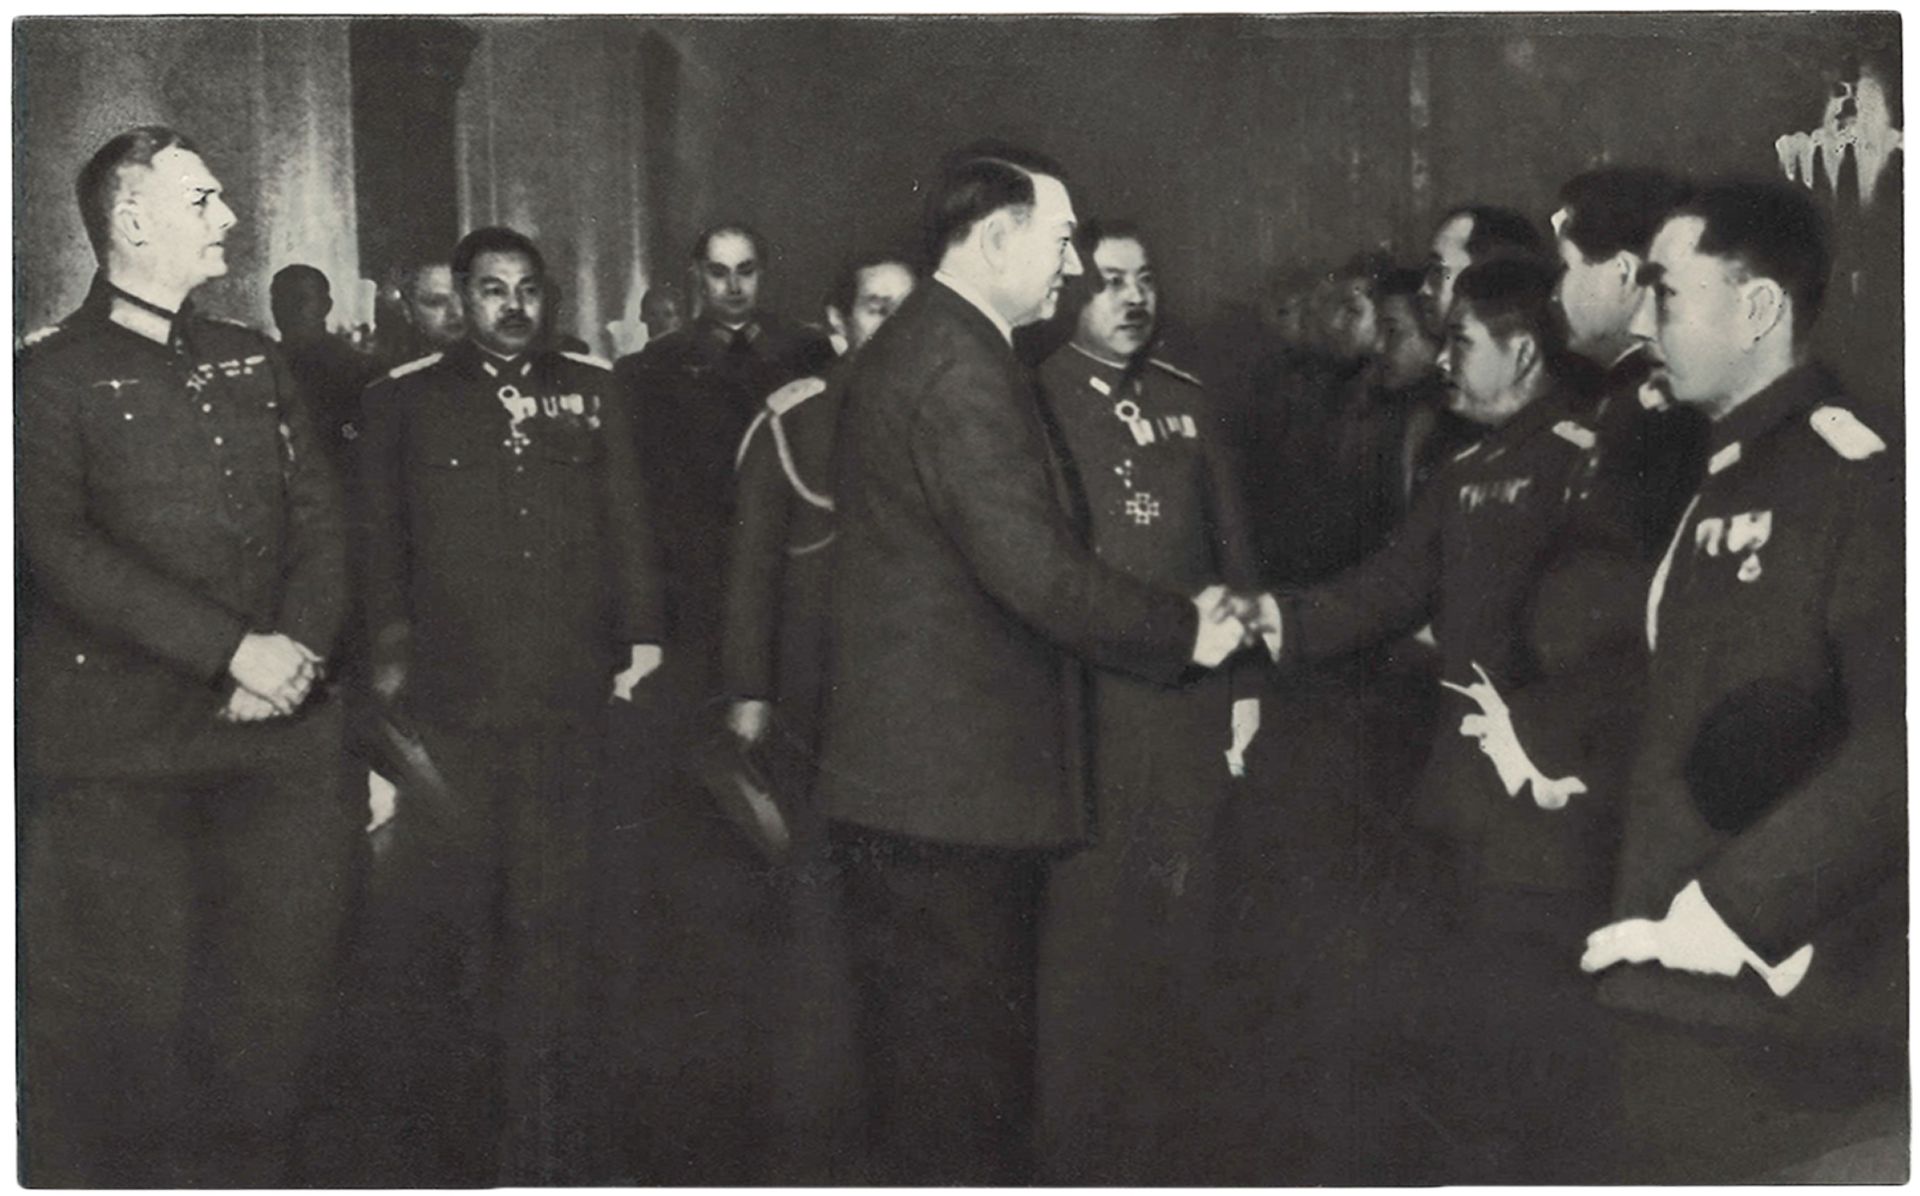 Visit of Japanese Military Delegation in Berlin. 31st January 1941. Press photo. 1941. 11x17 cm.